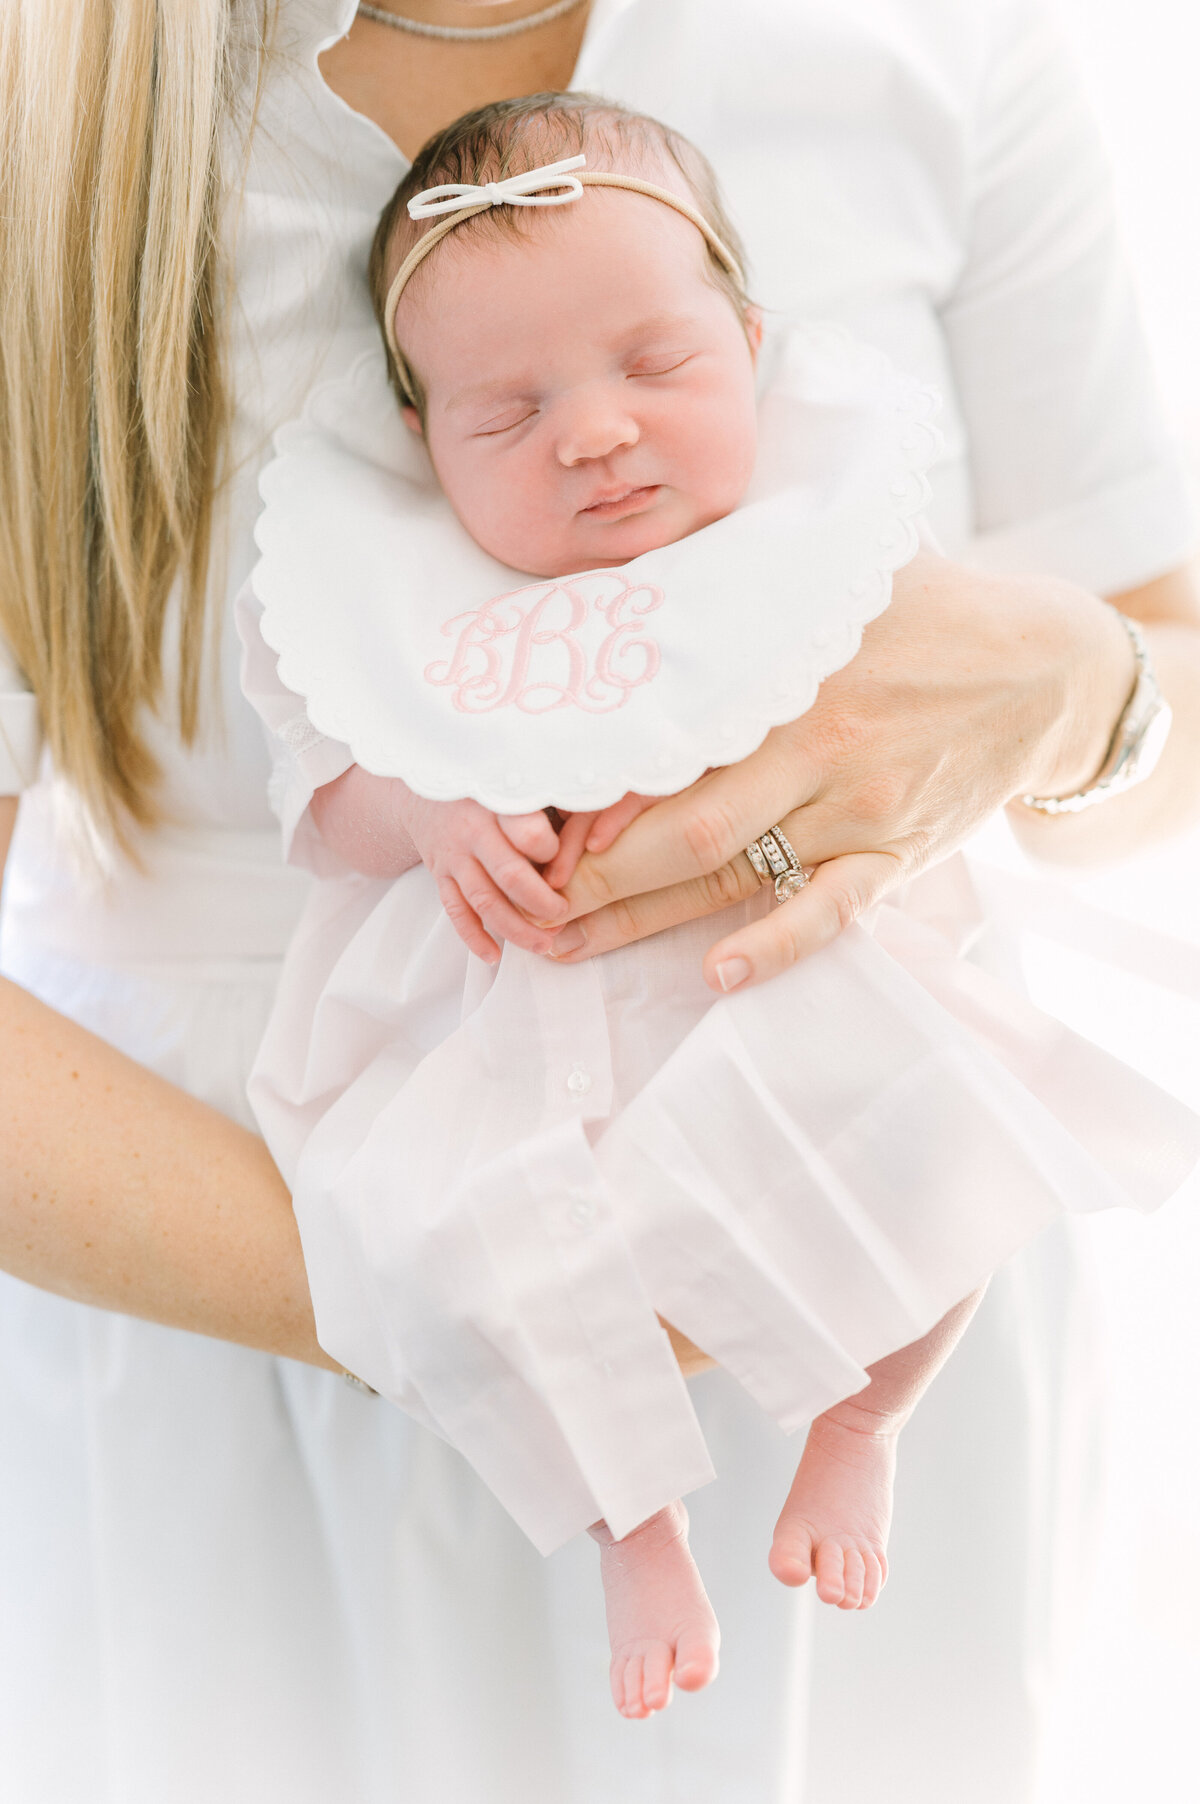 Mother holding a baby  girl wearing a monogramed bib.